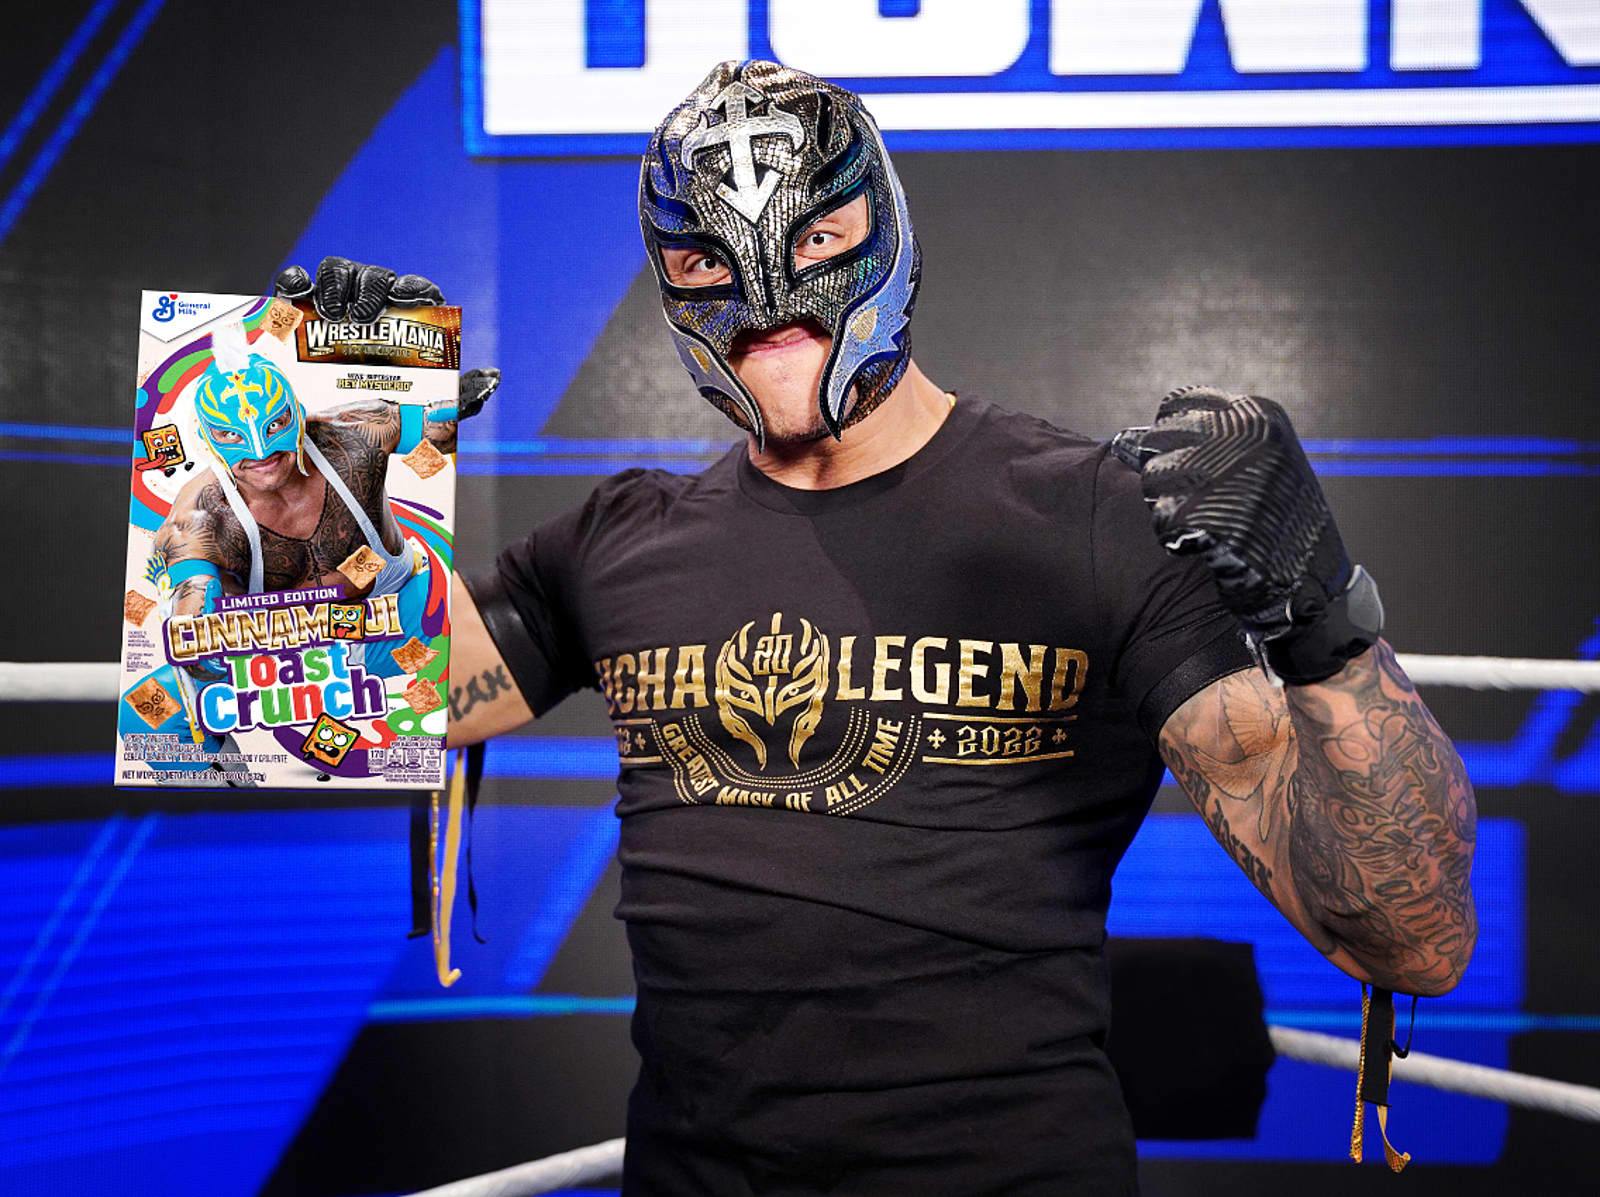 Rey Mysterio holding box of Cinnamon Toast Crunch with his fist in the air